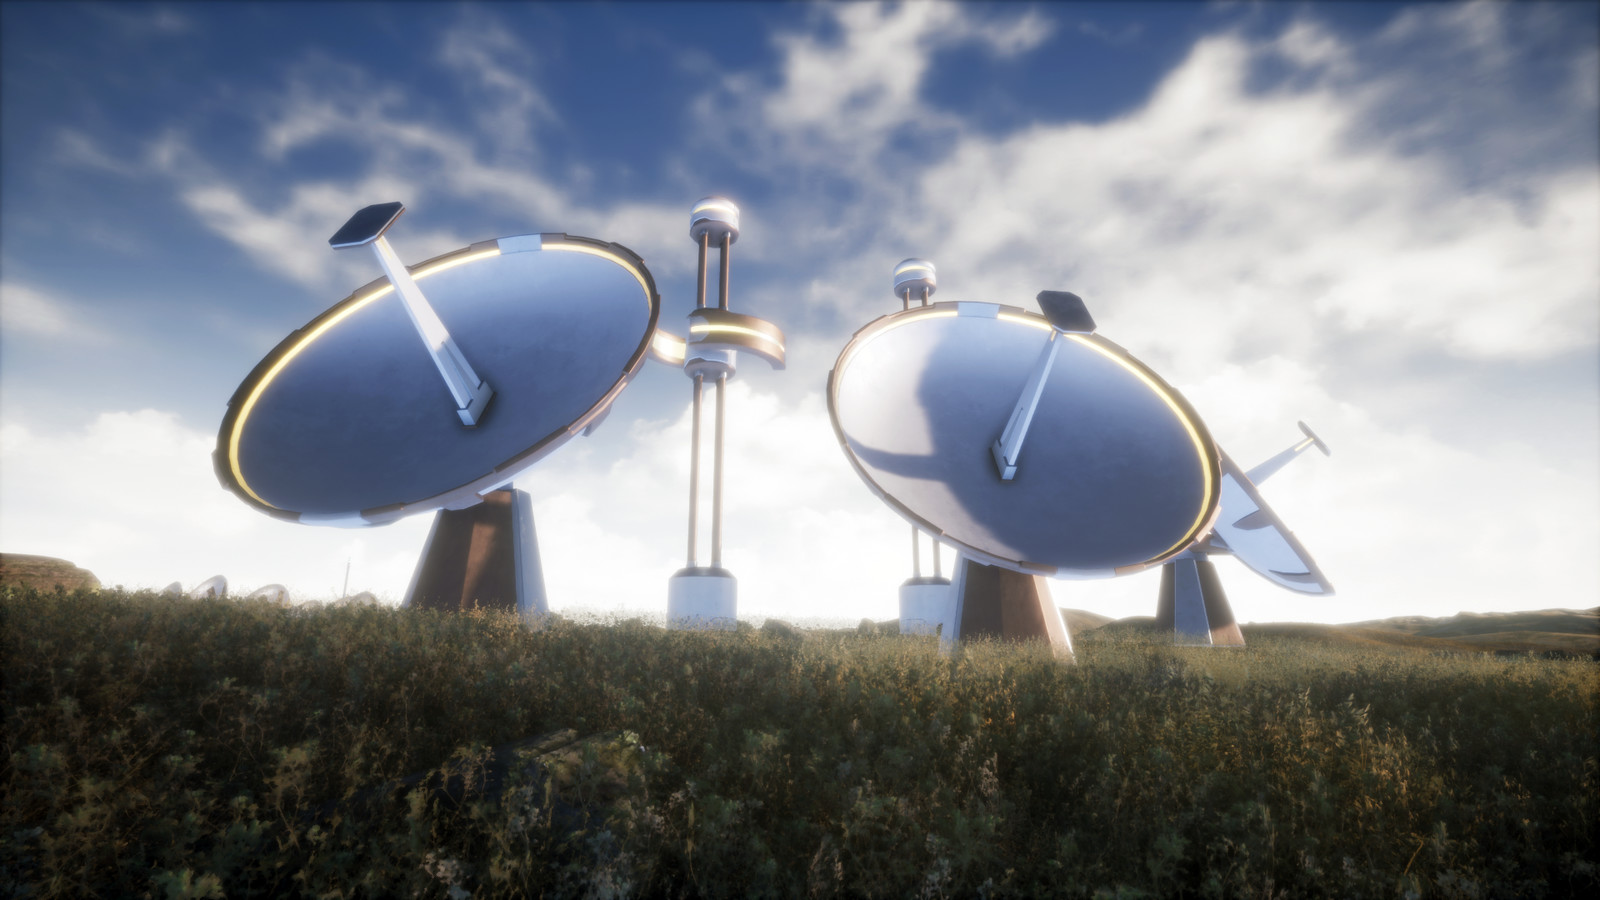 I know theyre not monuments, but giant satellites and antennas do make for some good scene filler.